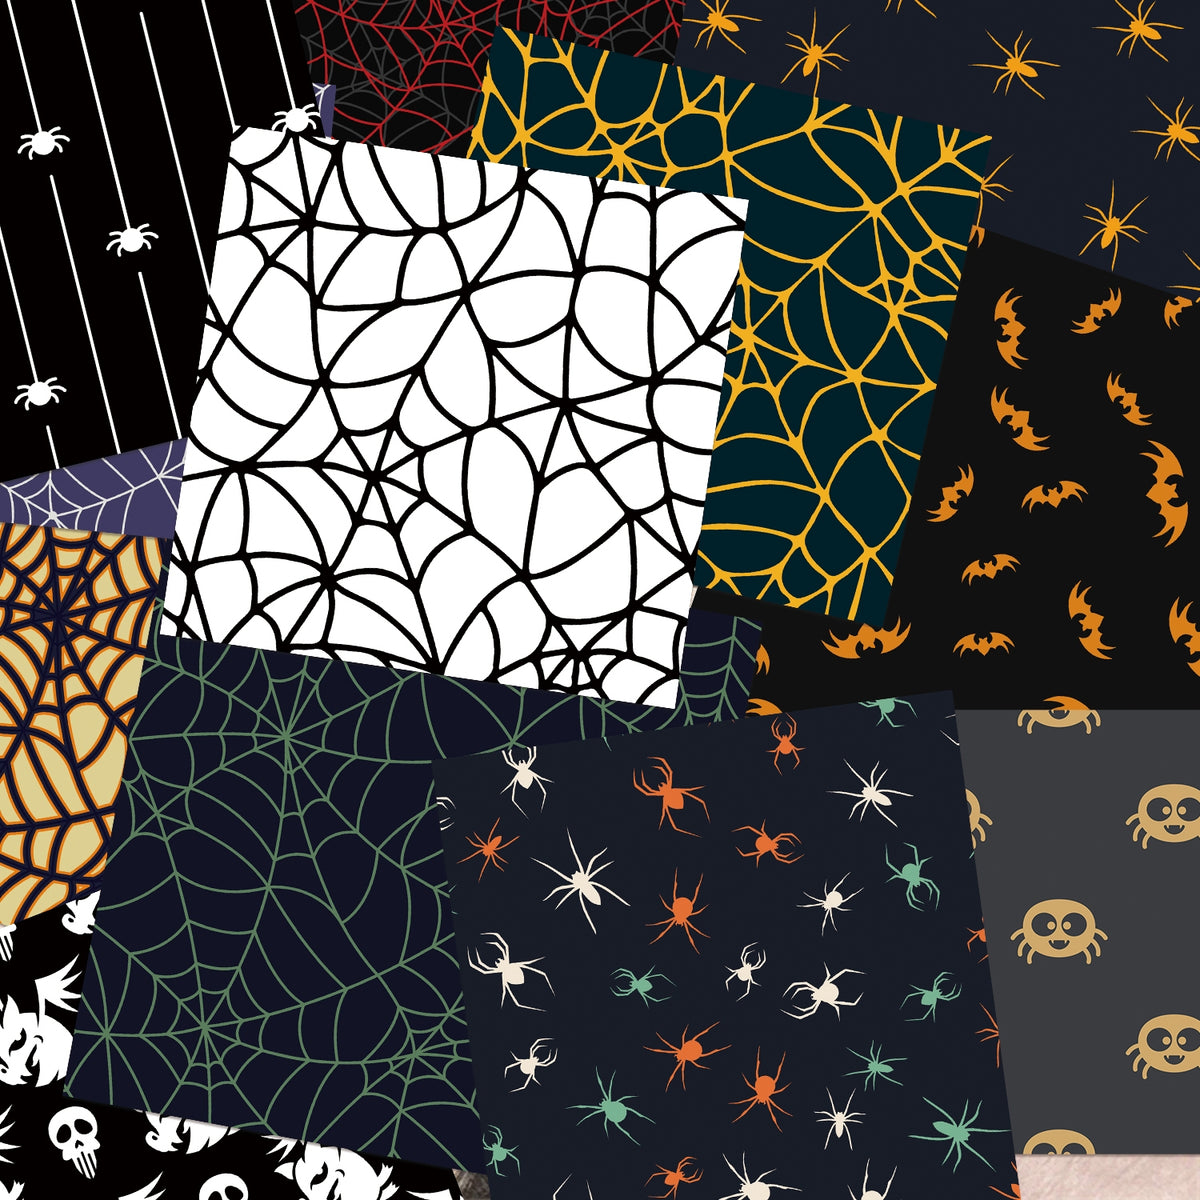 Halloween Basics Scrapbook Paper - Insects, Spider Webs1